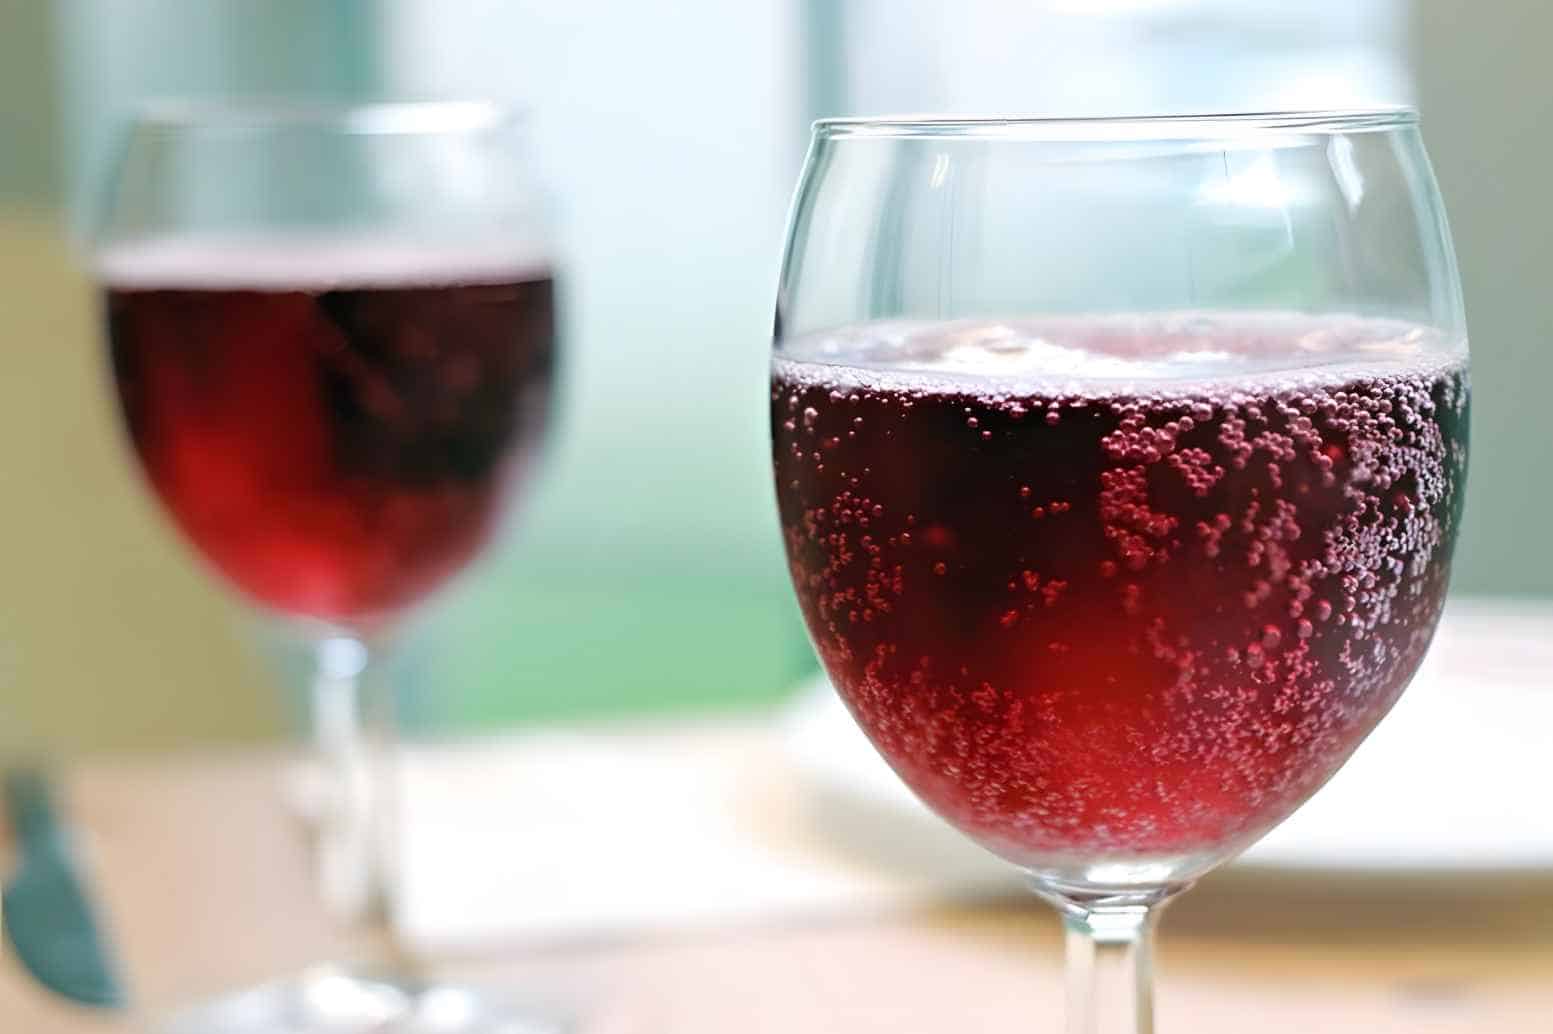 Get To Know The Lambrusco